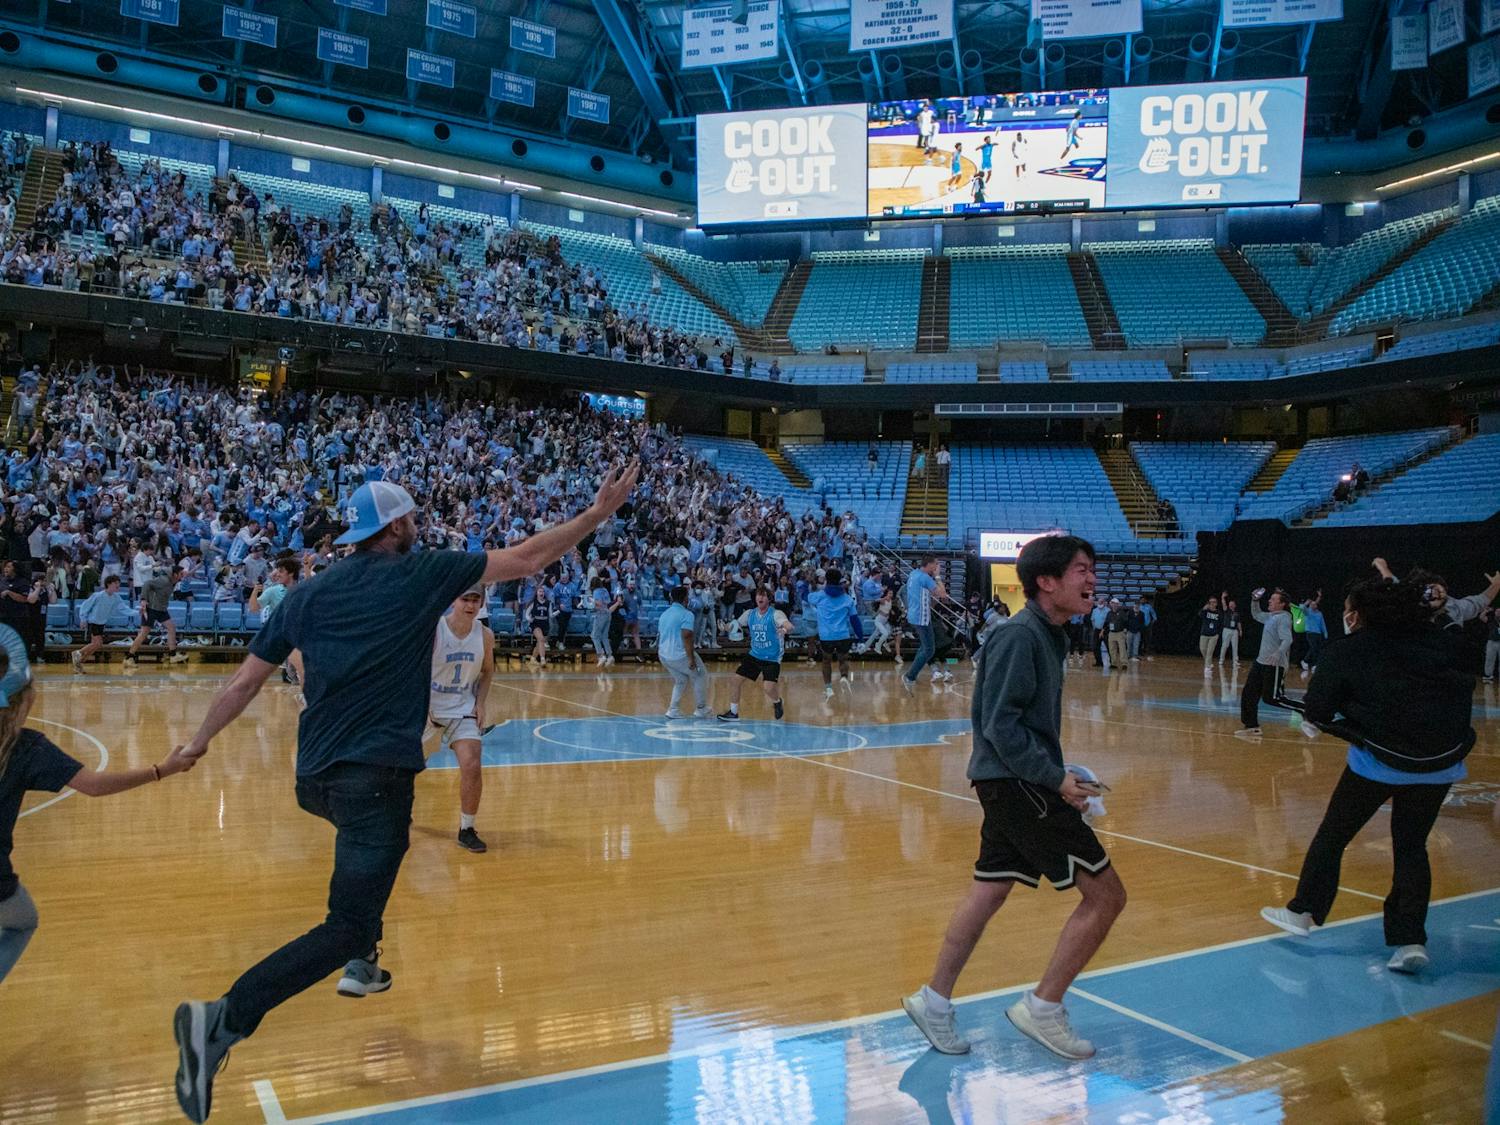 Fans storm the court at the Dean Smith Center after UNC beat Duke 81-77 in the Final Four on Saturday, April 2, 2022.